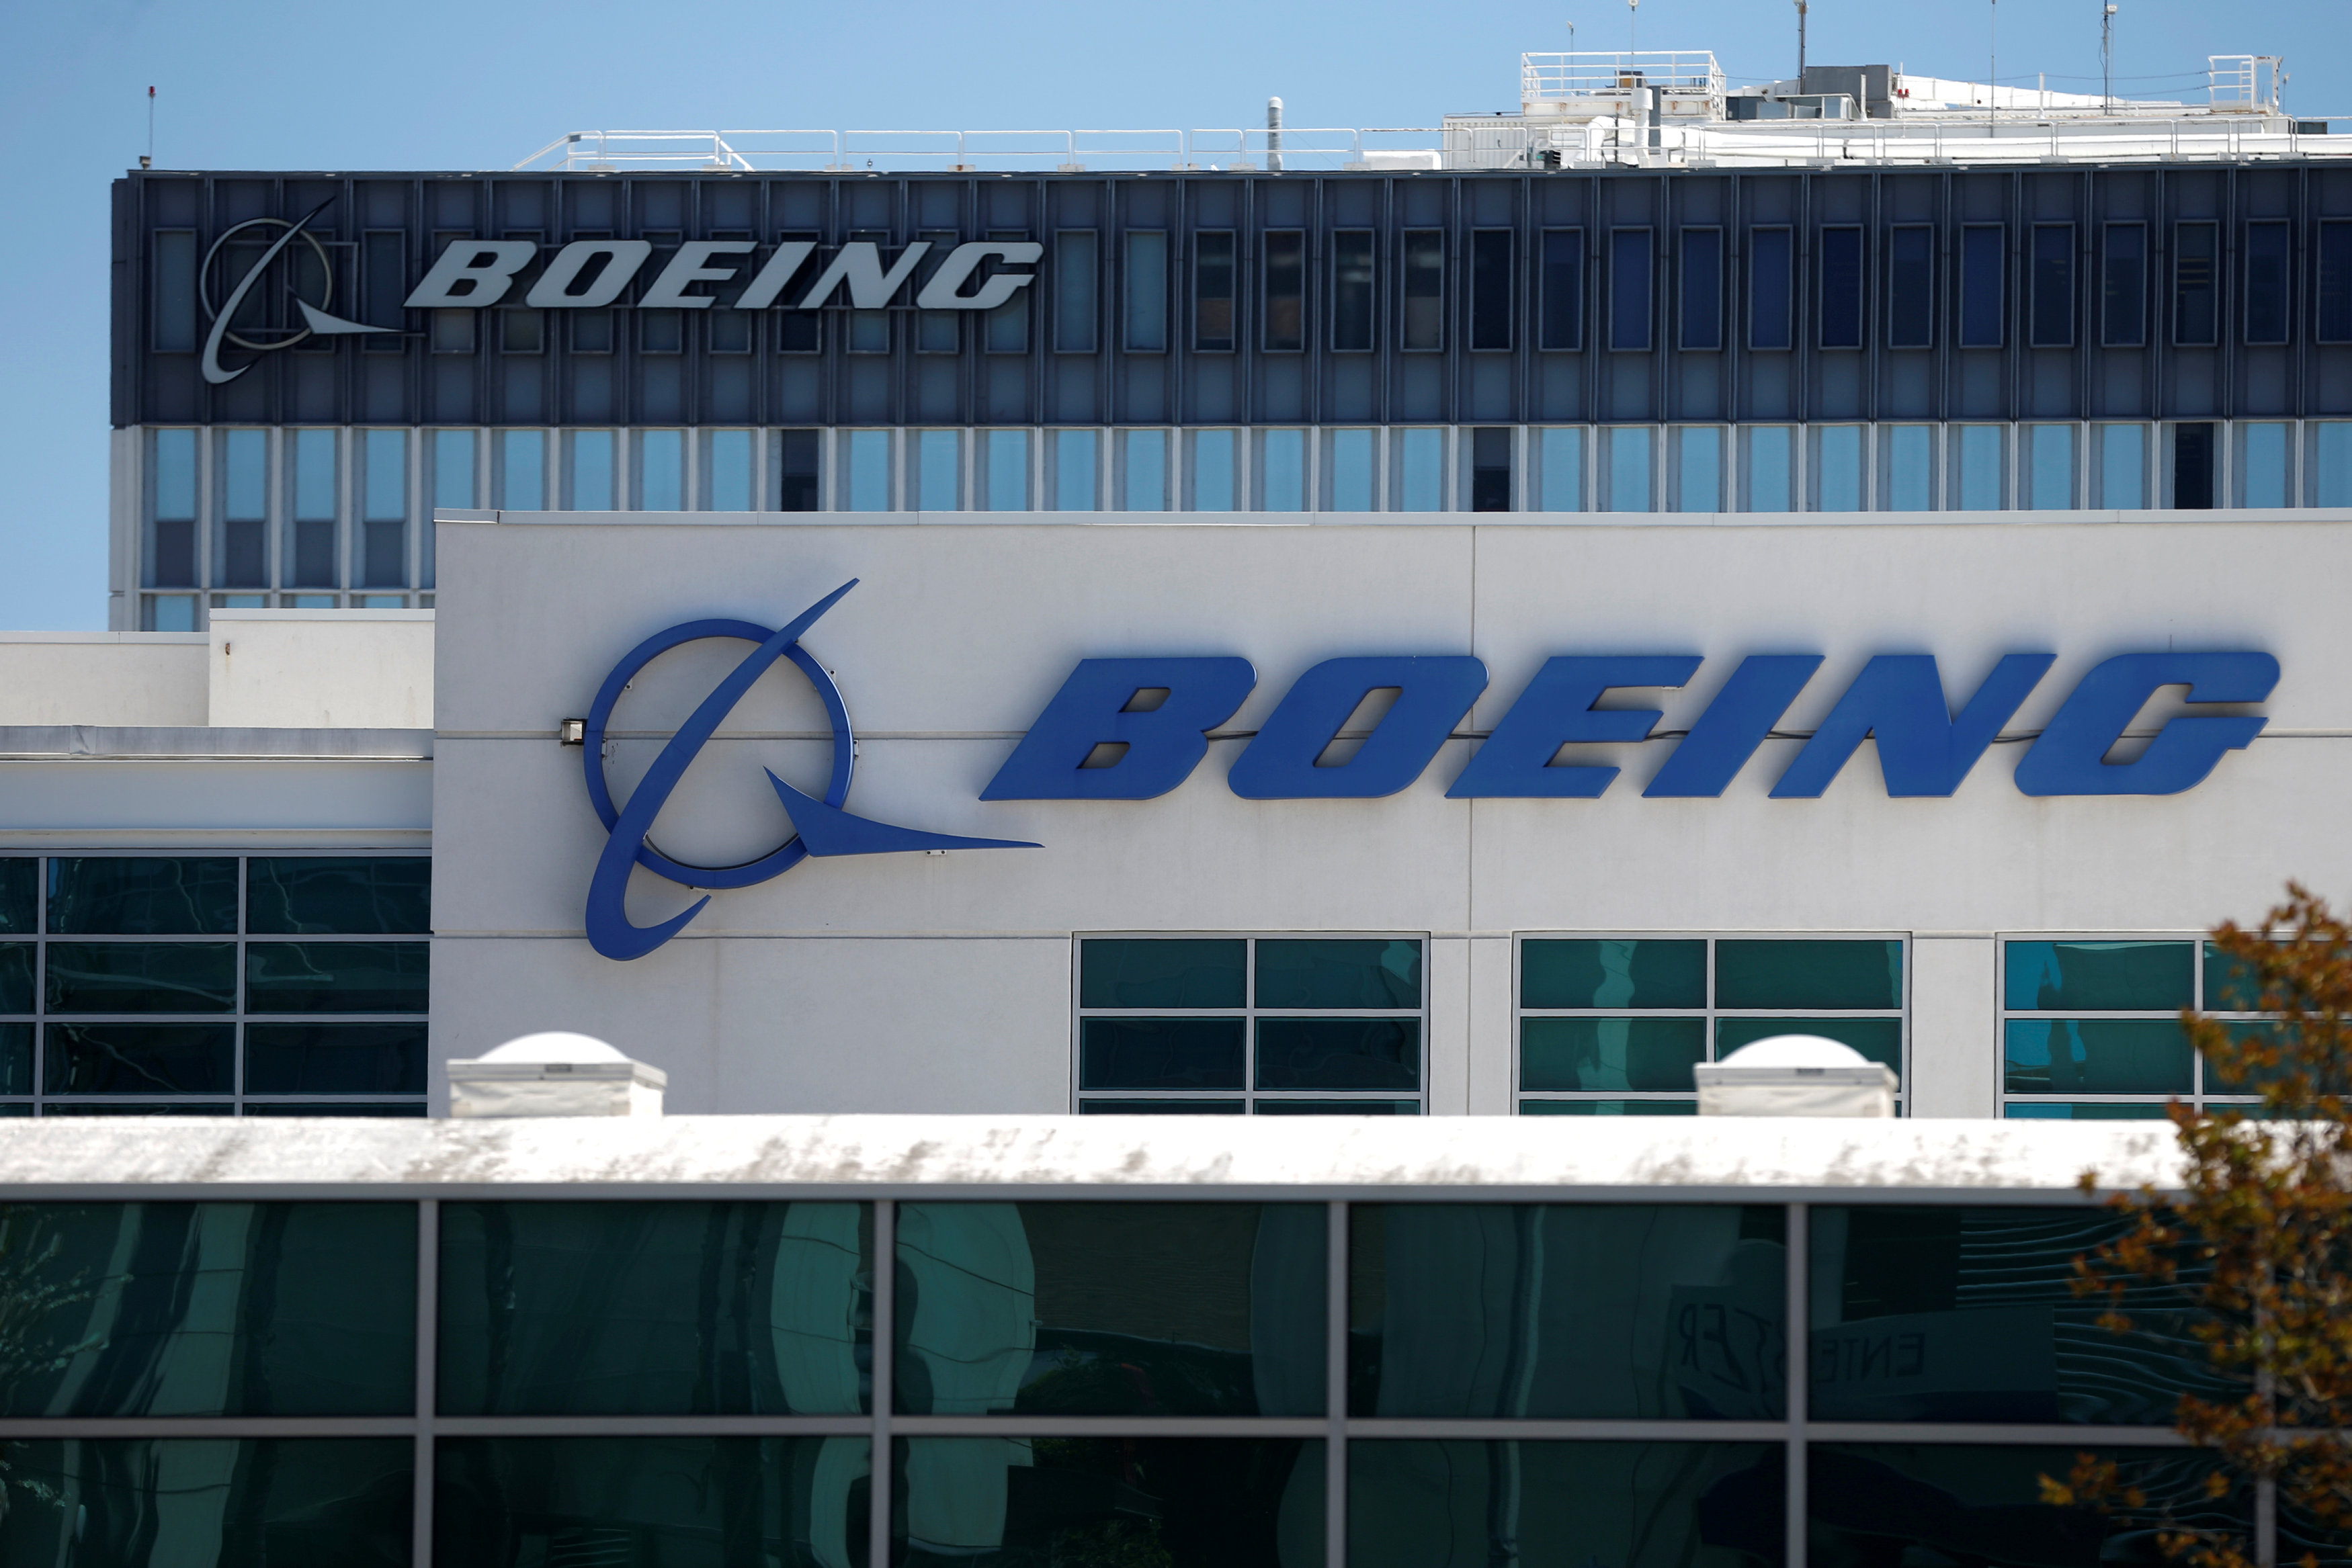 Brazil court overrules injunction on Boeing-Embraer tie-up